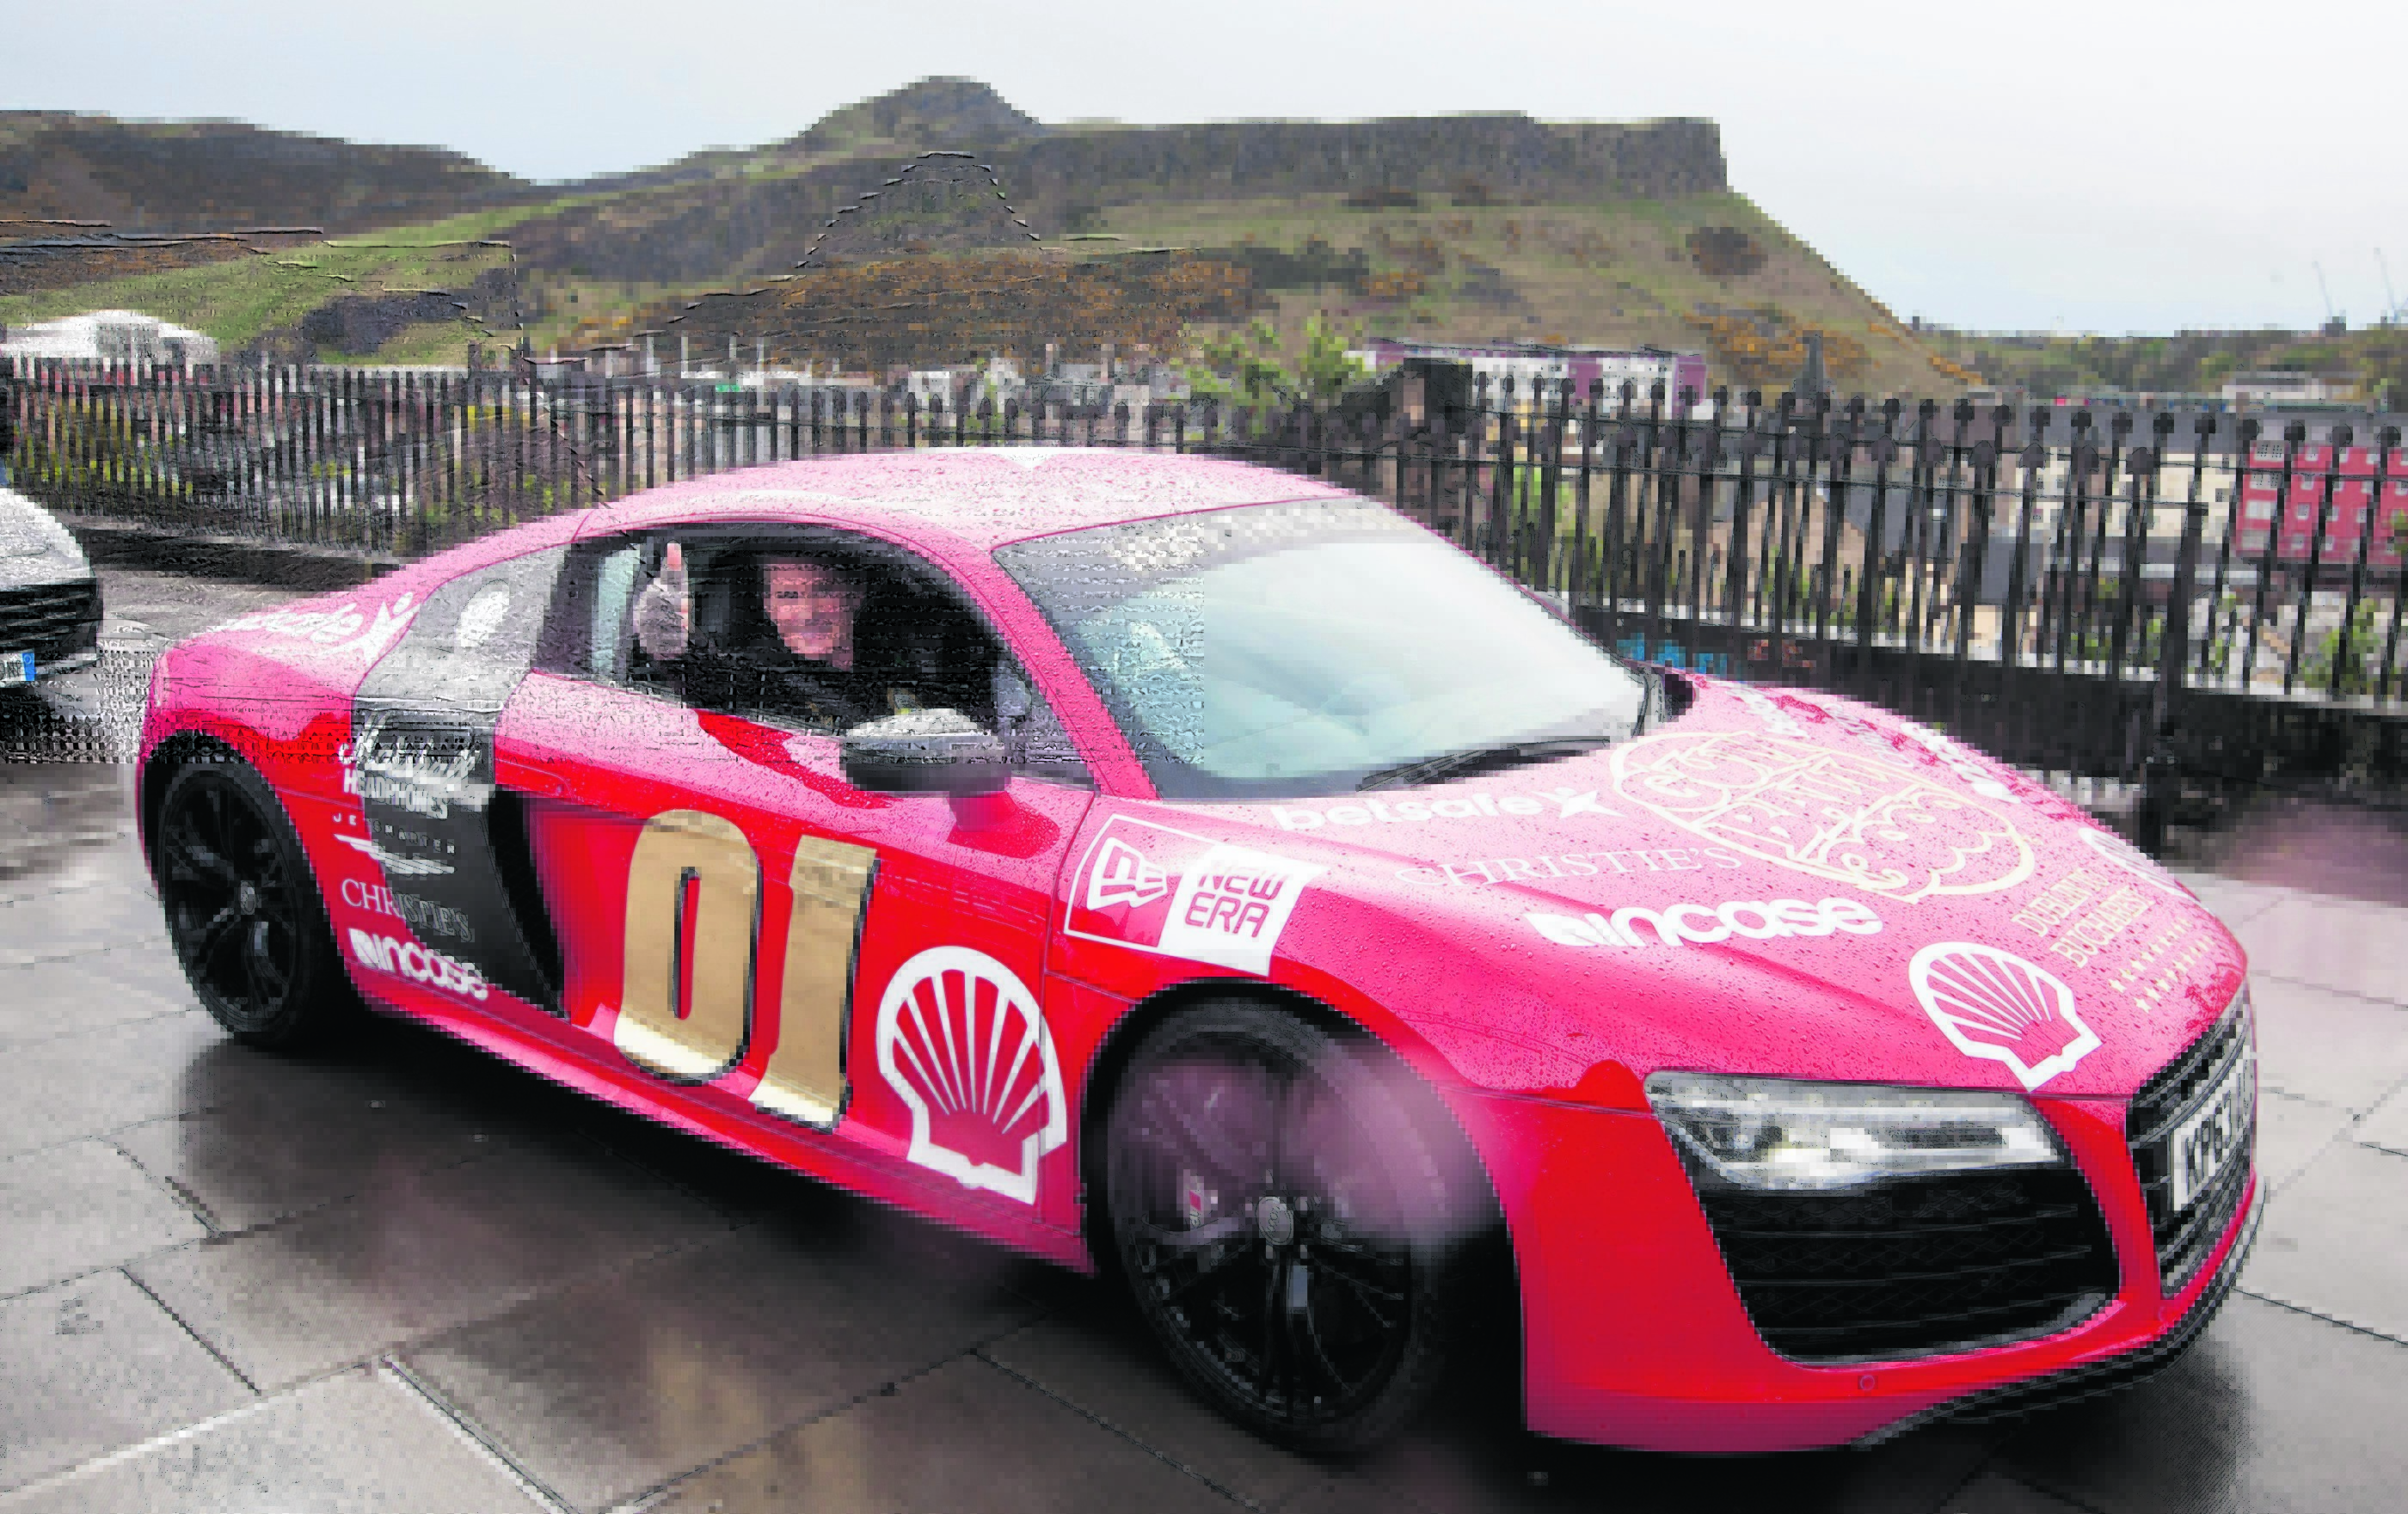 Actor David Hasselhoff in an Audi R6 joins the Gumball 3000 leaving Edinburgh on second leg of Dublin to Bucharest.